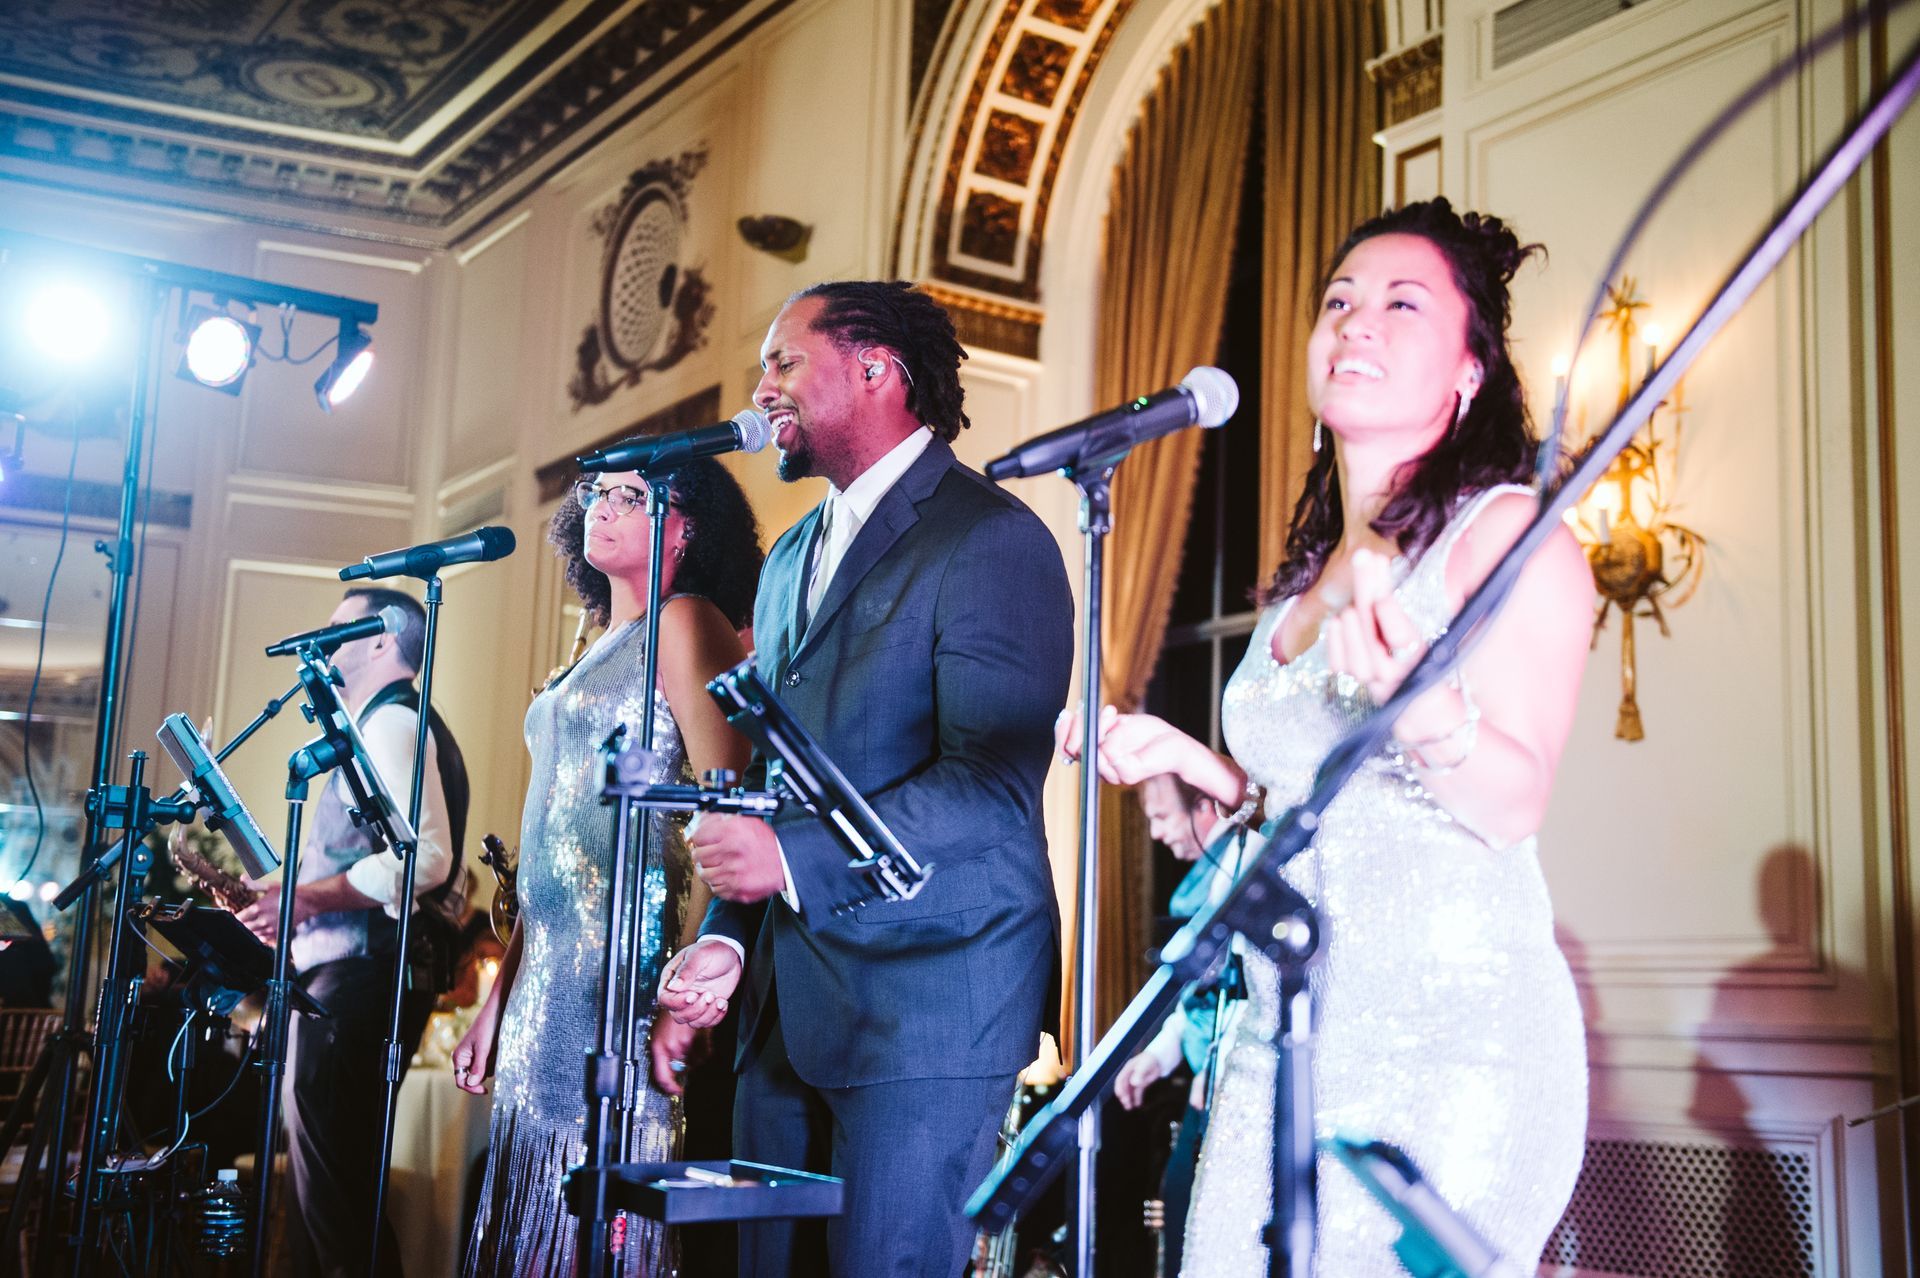 Band members from Main Street Soul singing into microphones in a room for wedding in Detroit, Michigan